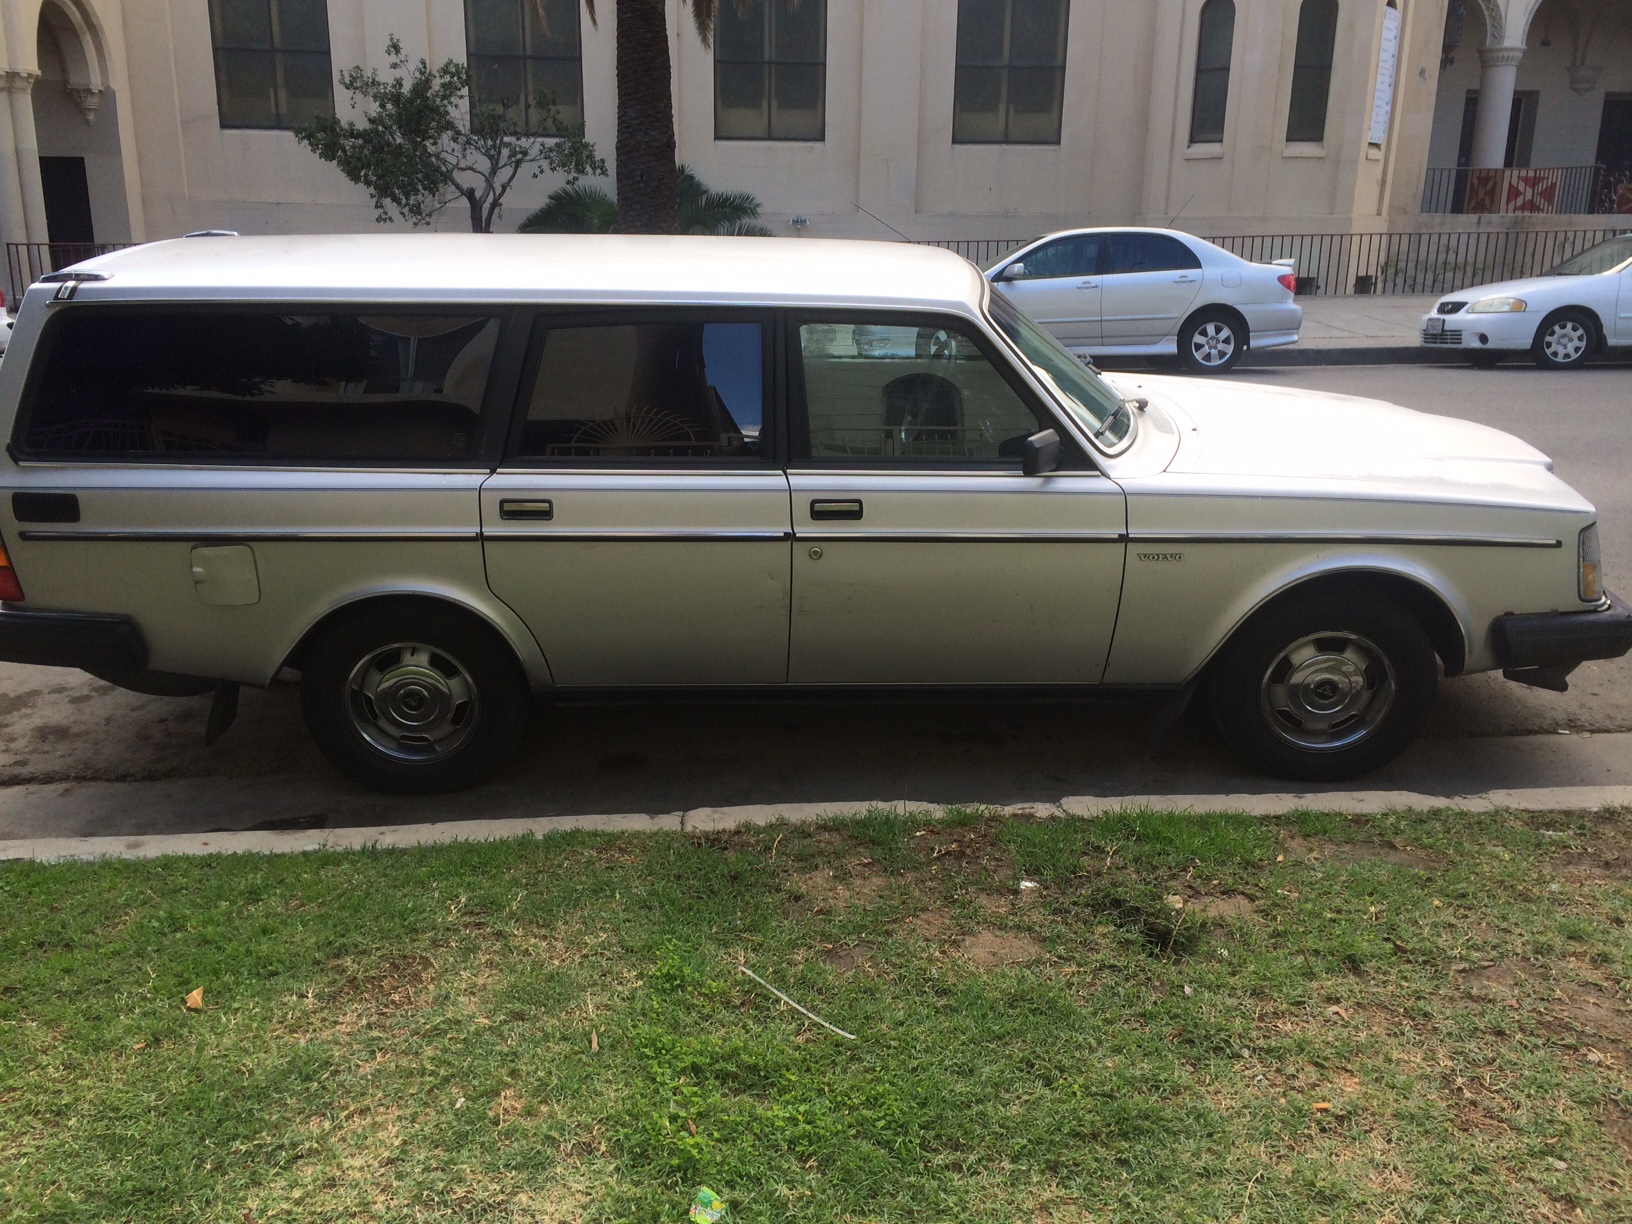 For sale 1984 240 silver wagon - Volvo Forums - Volvo ...